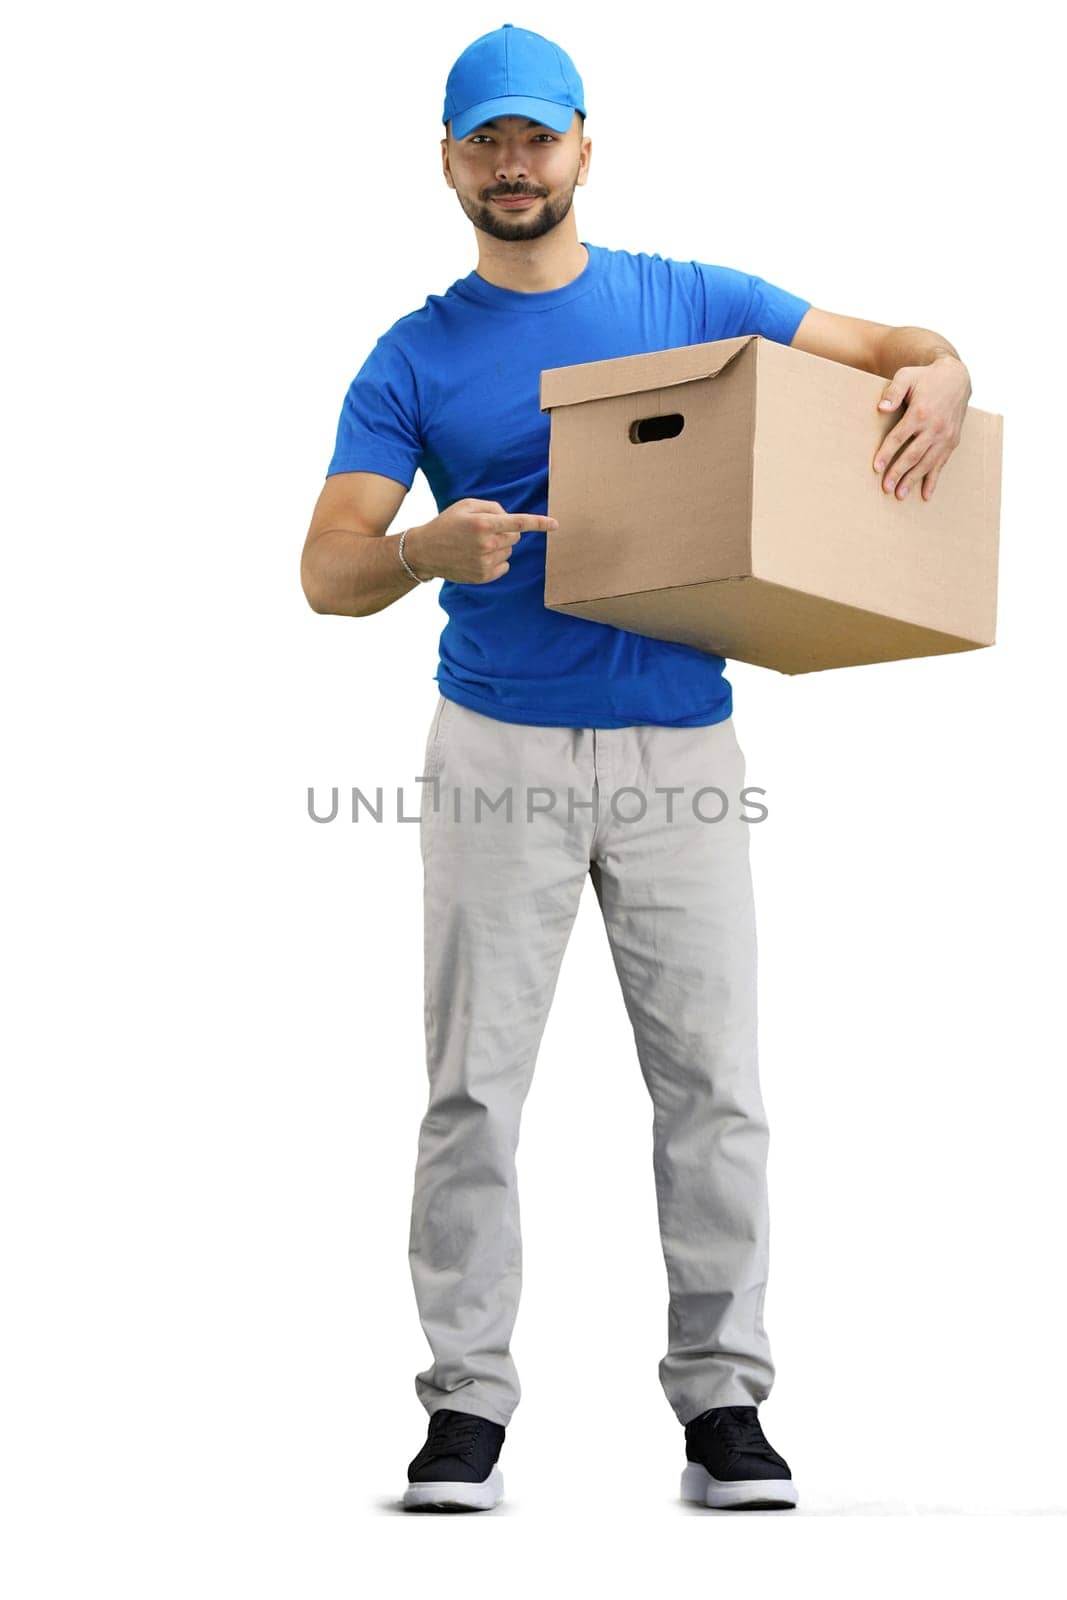 The deliveryman, in full height, on a white background, points to the box by Prosto